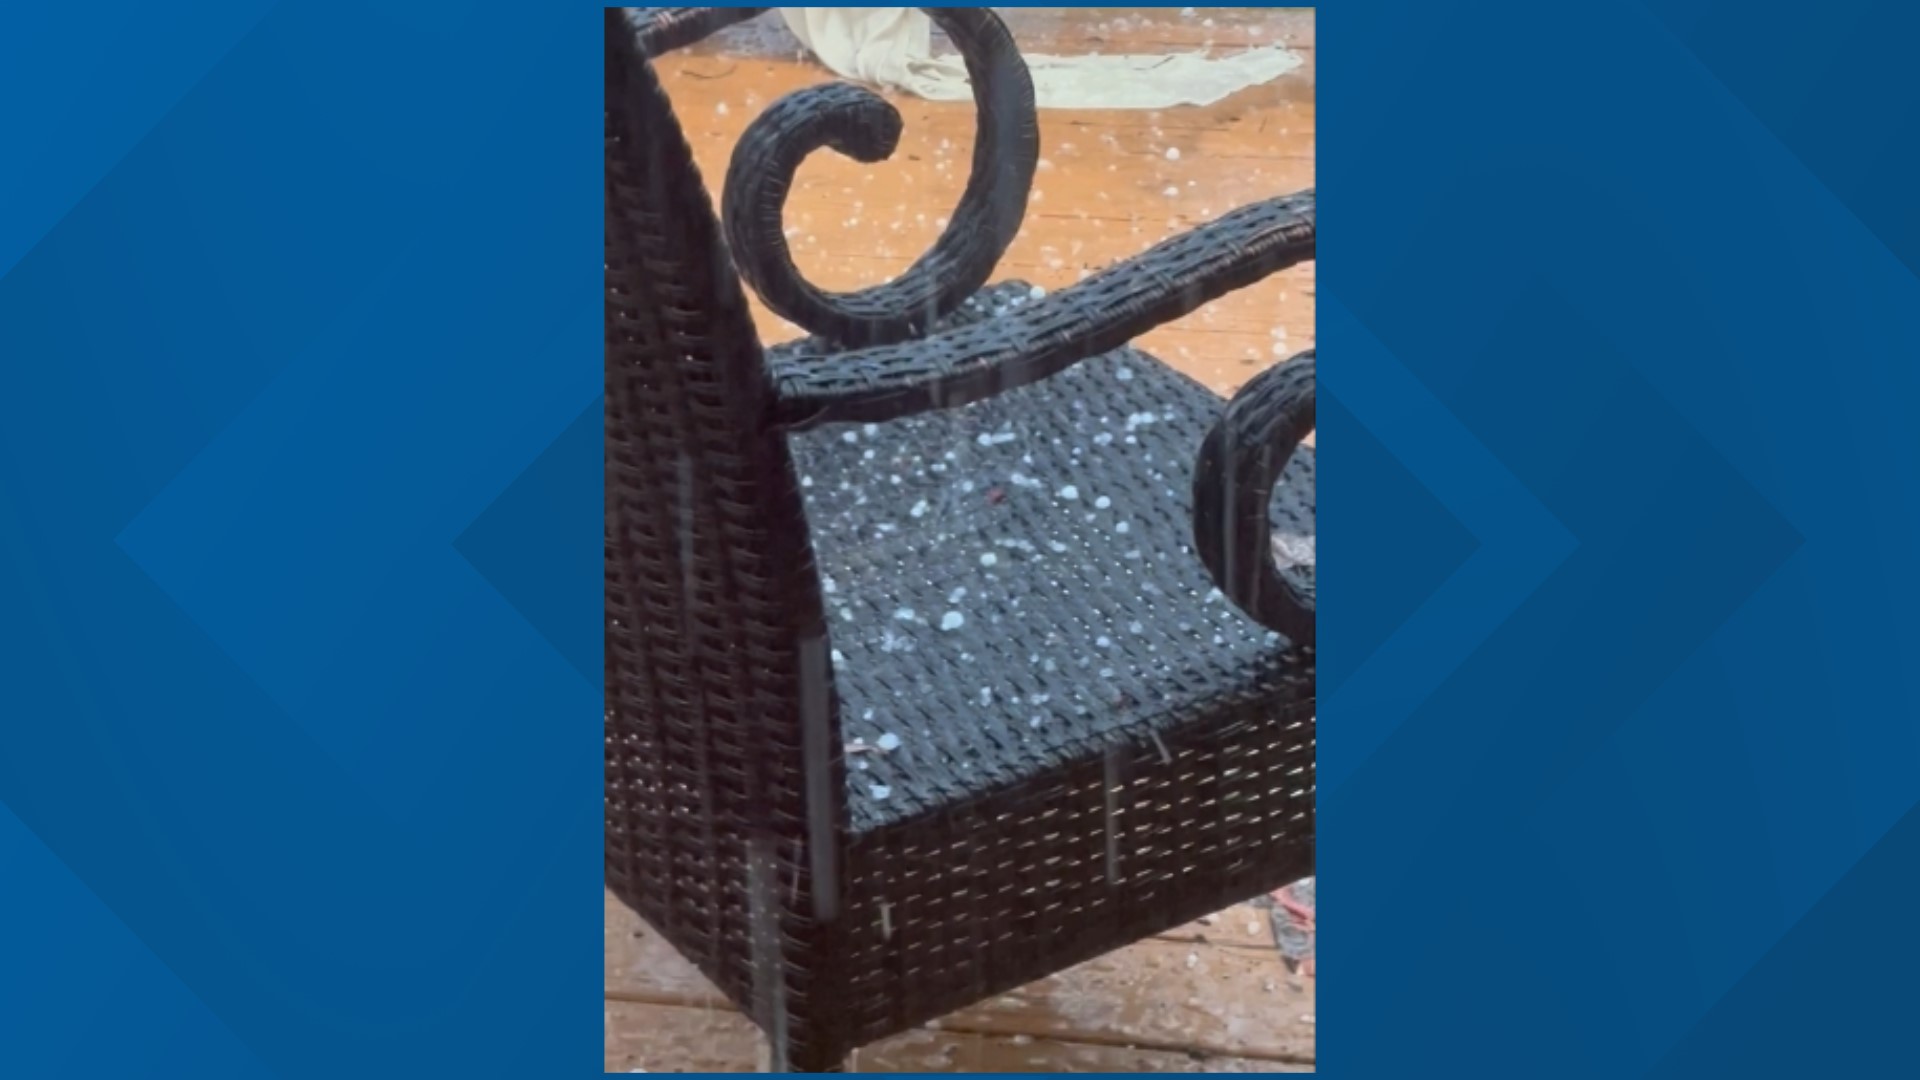 Hail came down on the porch of a home on Jacksonville's Northside Monday morning.